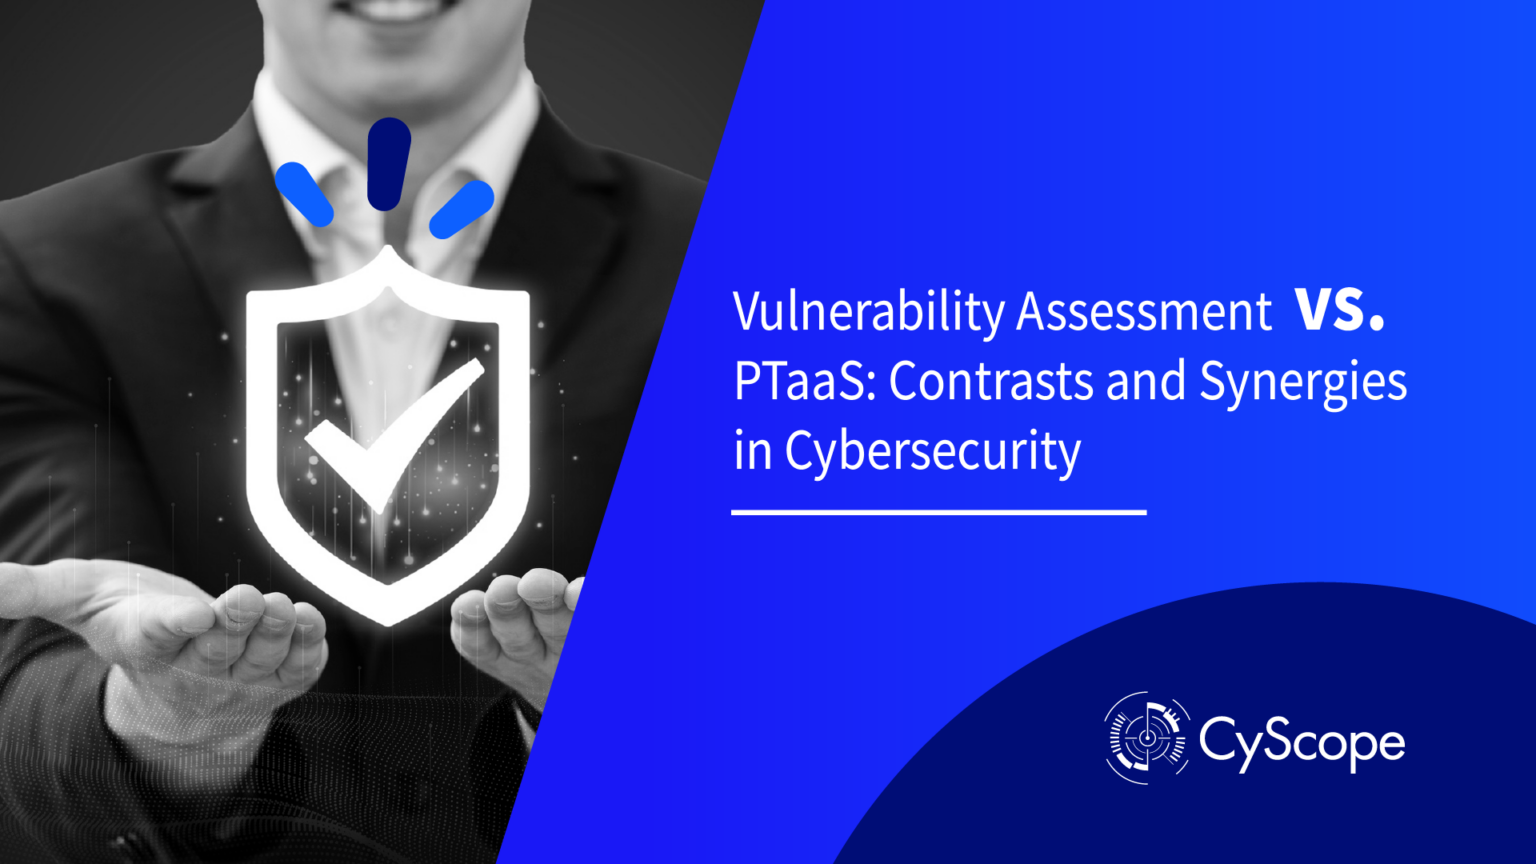 Vulnerability Assessment vs. PTaaS: Contrasts and Synergies in Cybersecurity